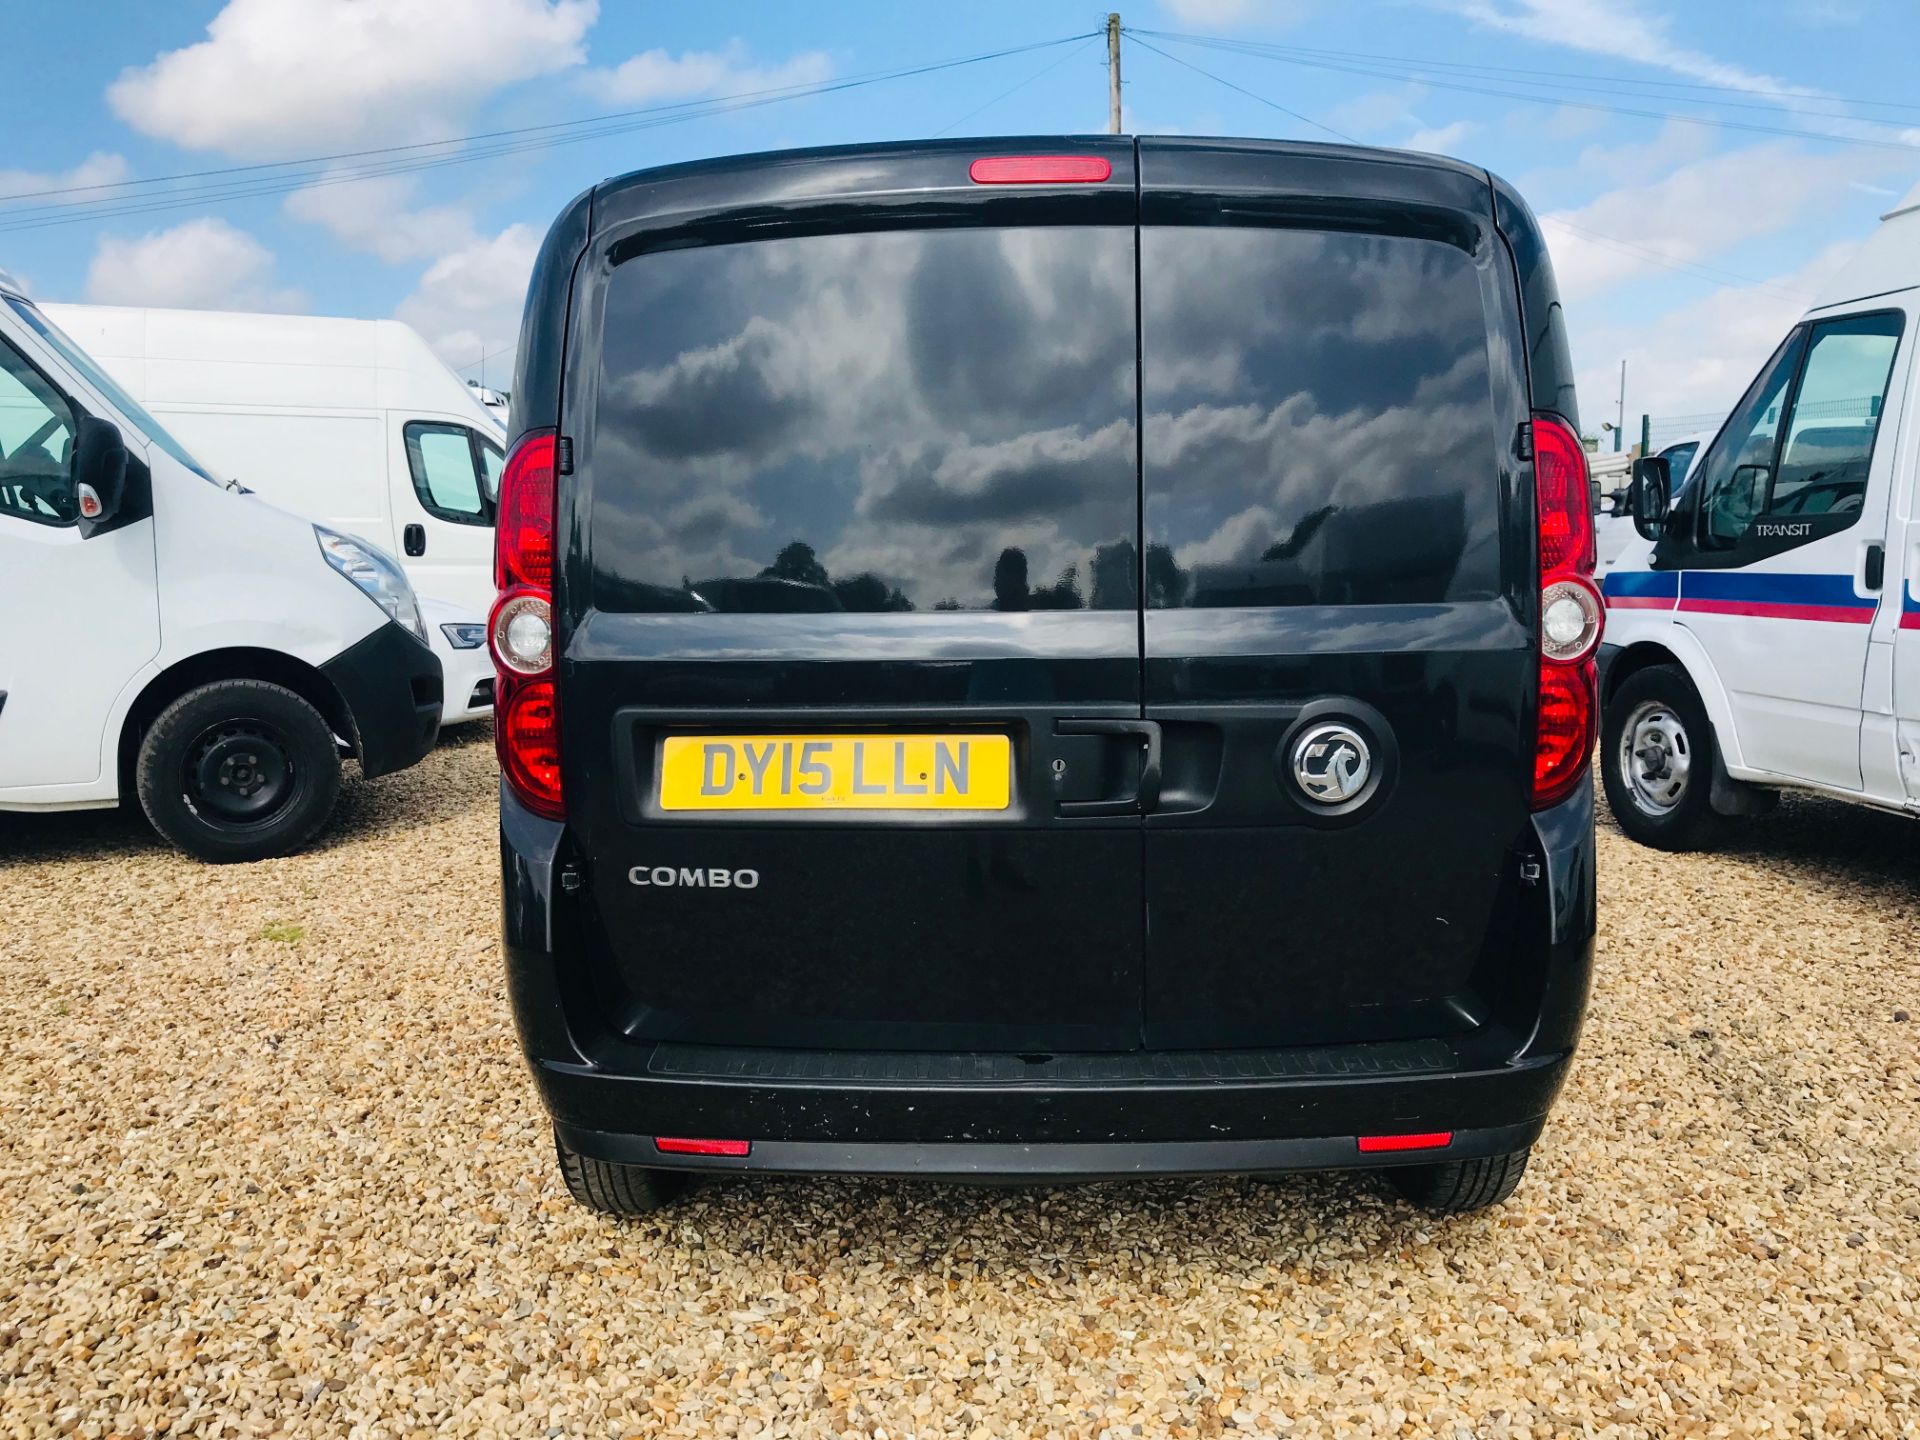 VAUXHALL COMBO CDTI "SPORTIVE - BLACK EDITION" (15 REG - NEW SHAPE) 1 OWNER FSH *AIR CON* ELEC PACK - Image 4 of 15